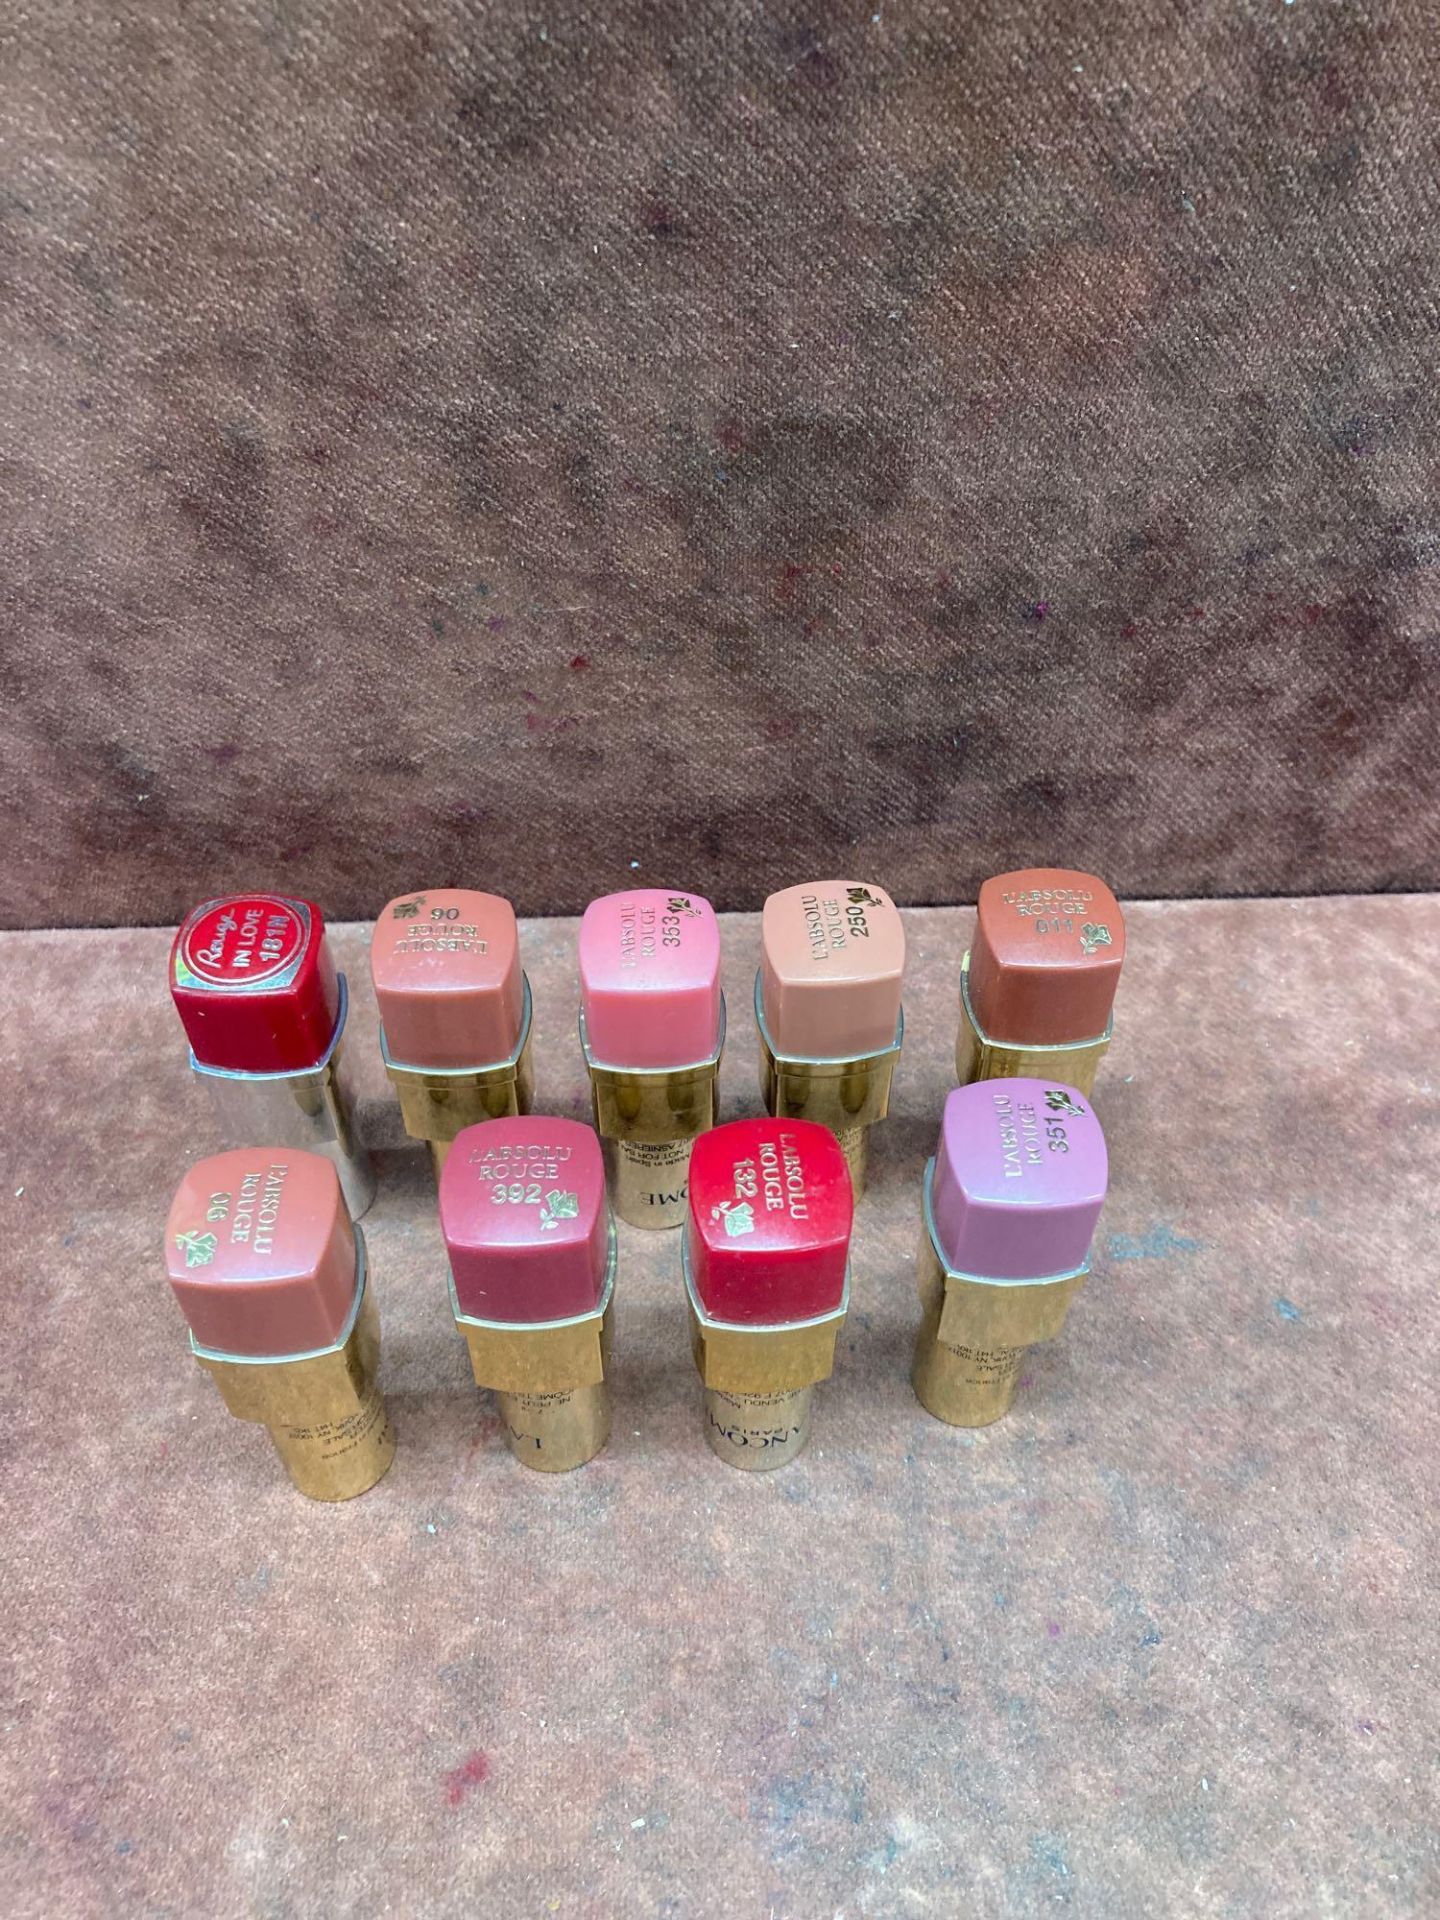 (Jb) RRP £270 Lot To Contain 9 Testers Of Assorted Premium Lancôme Lipsticks All Assorted Shades And